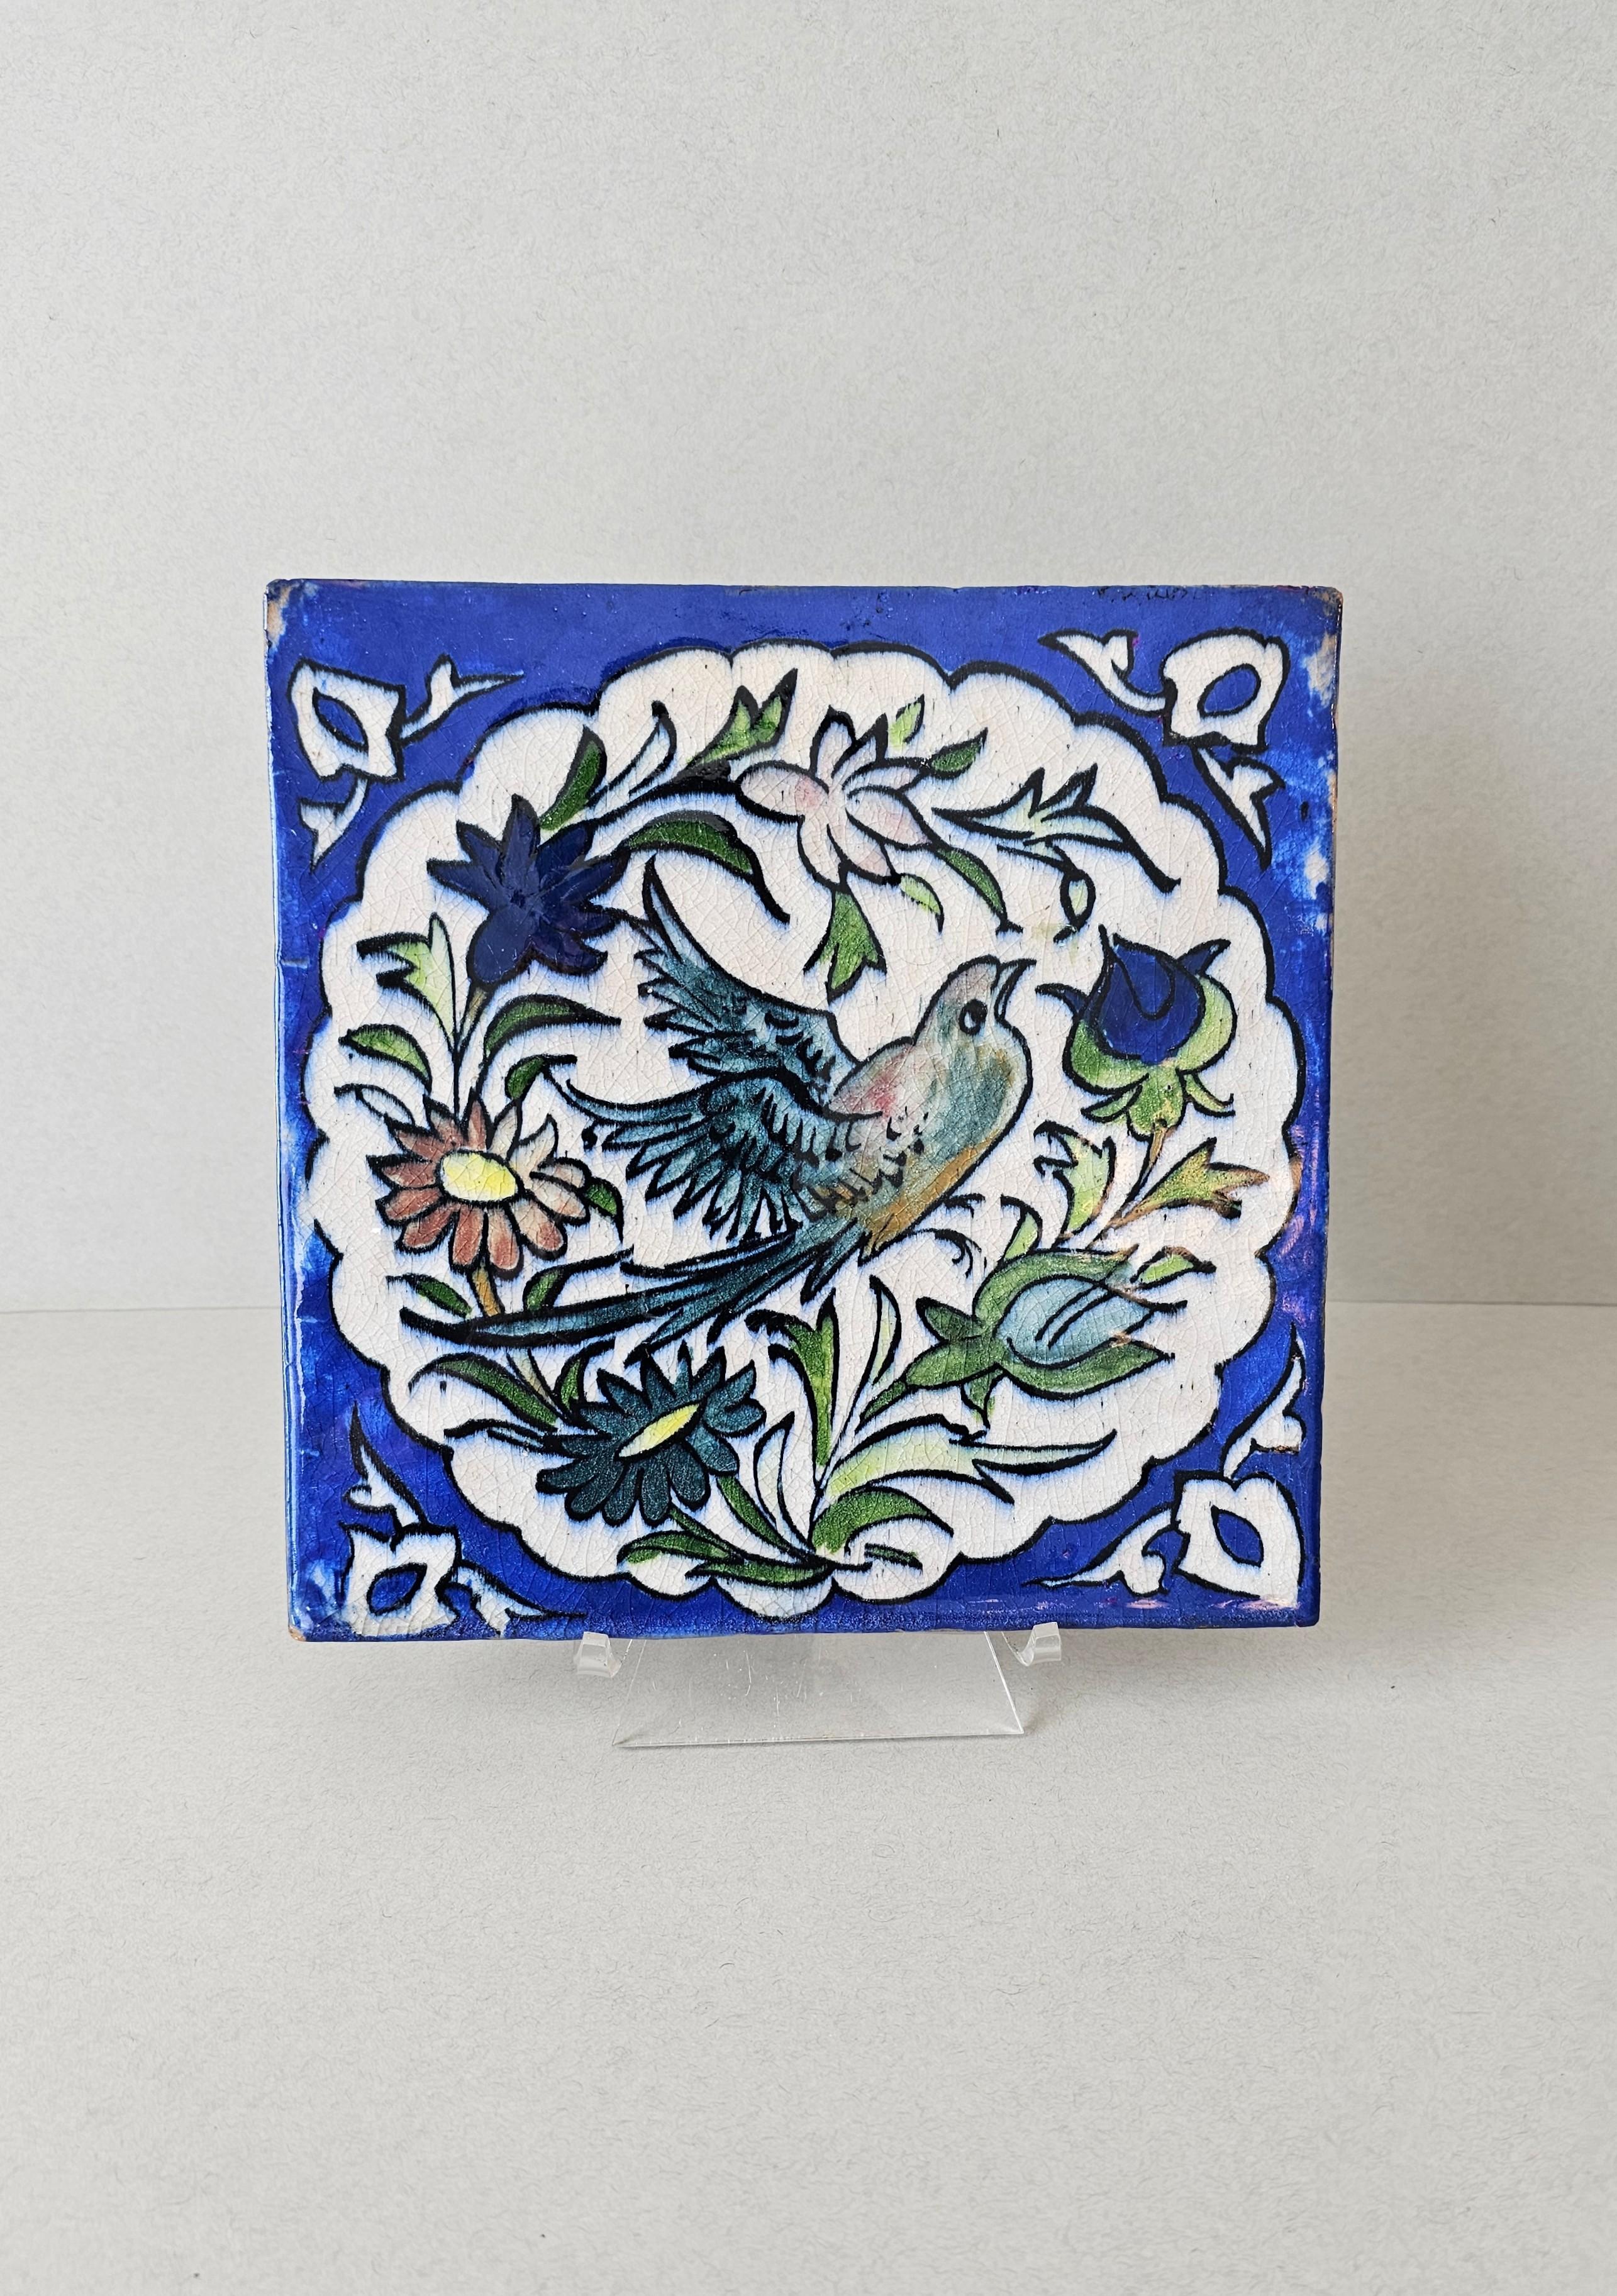 Exquisitely hand painted ceramic wall tile, Persia, 19th century, antique architectural salvage building element, beautifully colored artwork depicting bird with flowers. 

Provenance:
From the estate of Margaret 